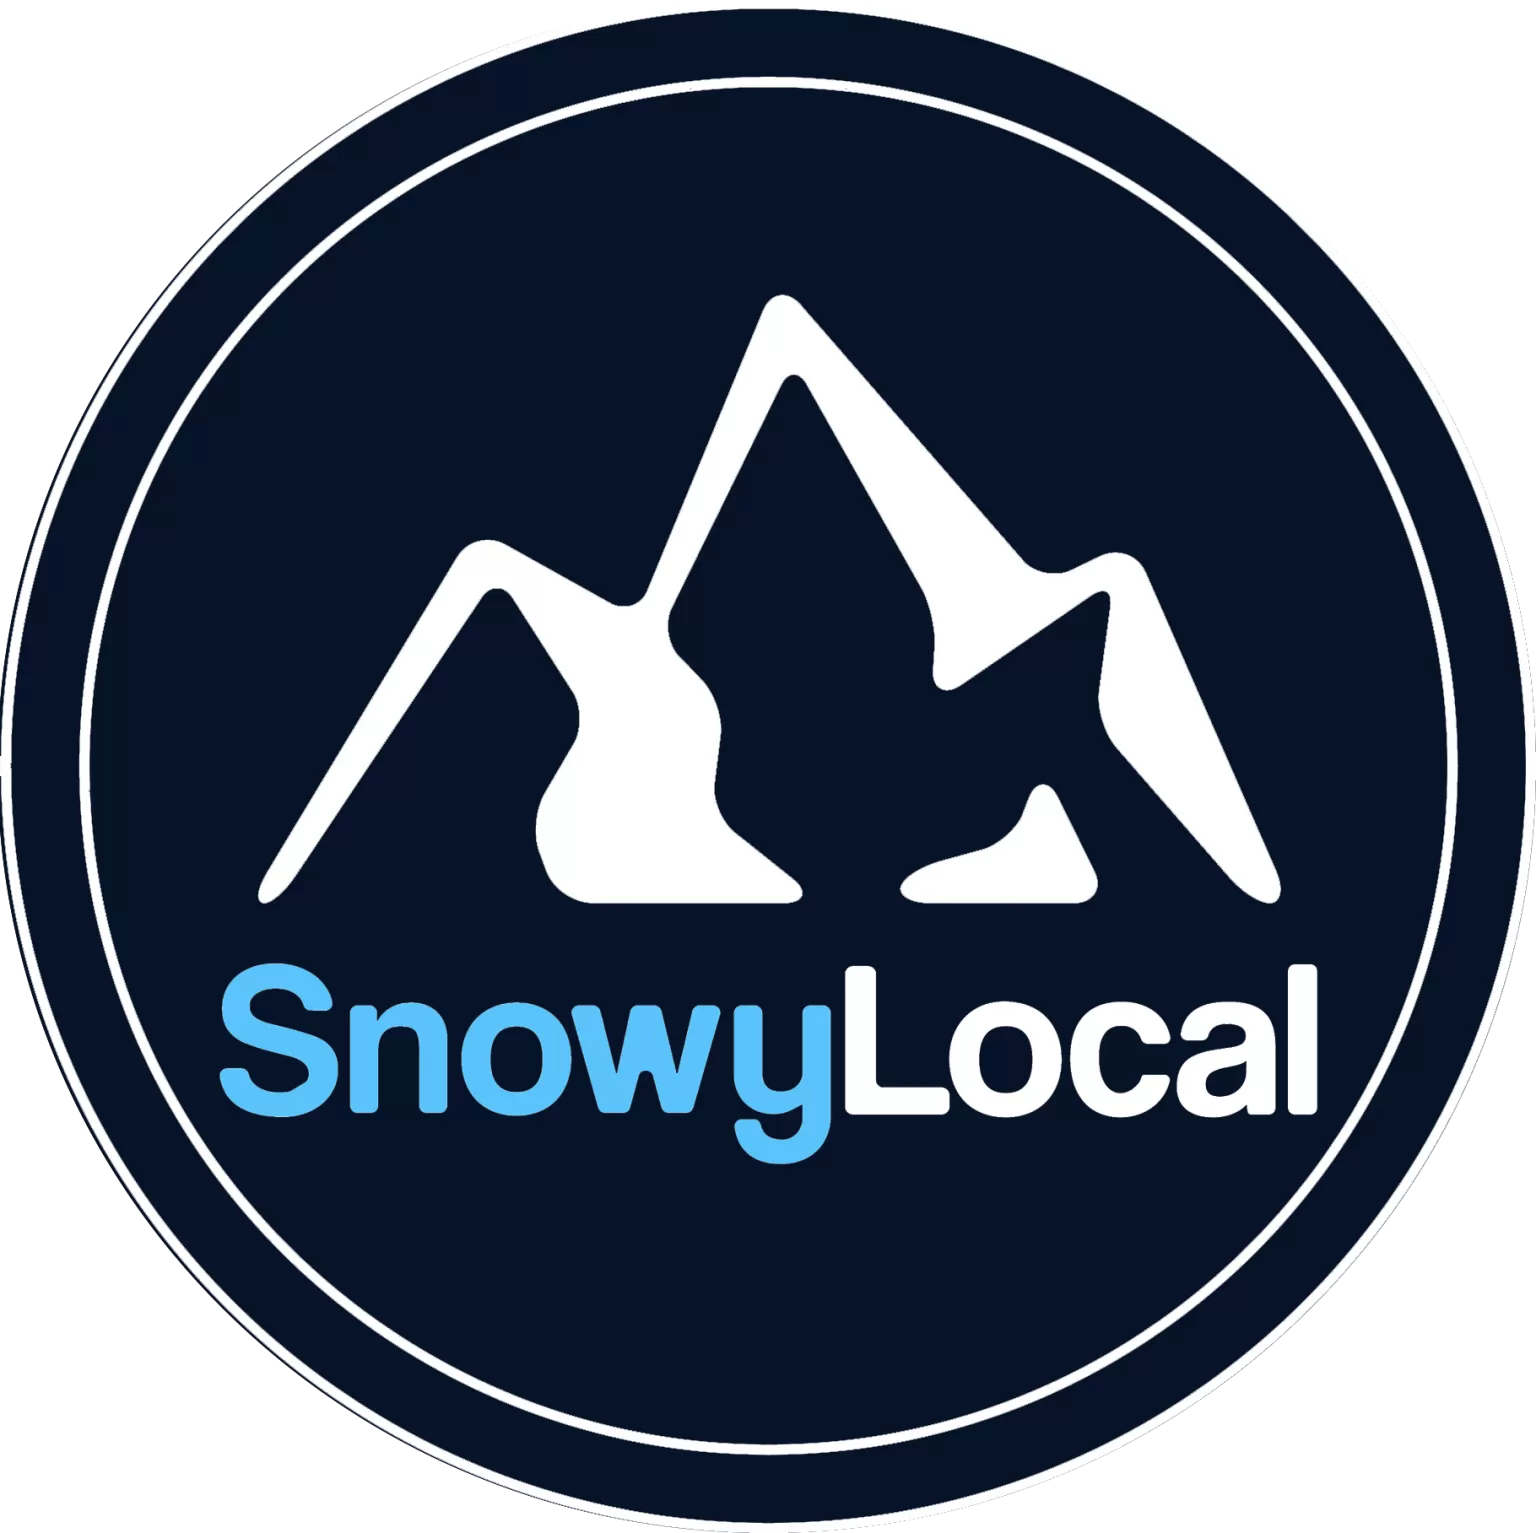 Snowy Local has launched! image